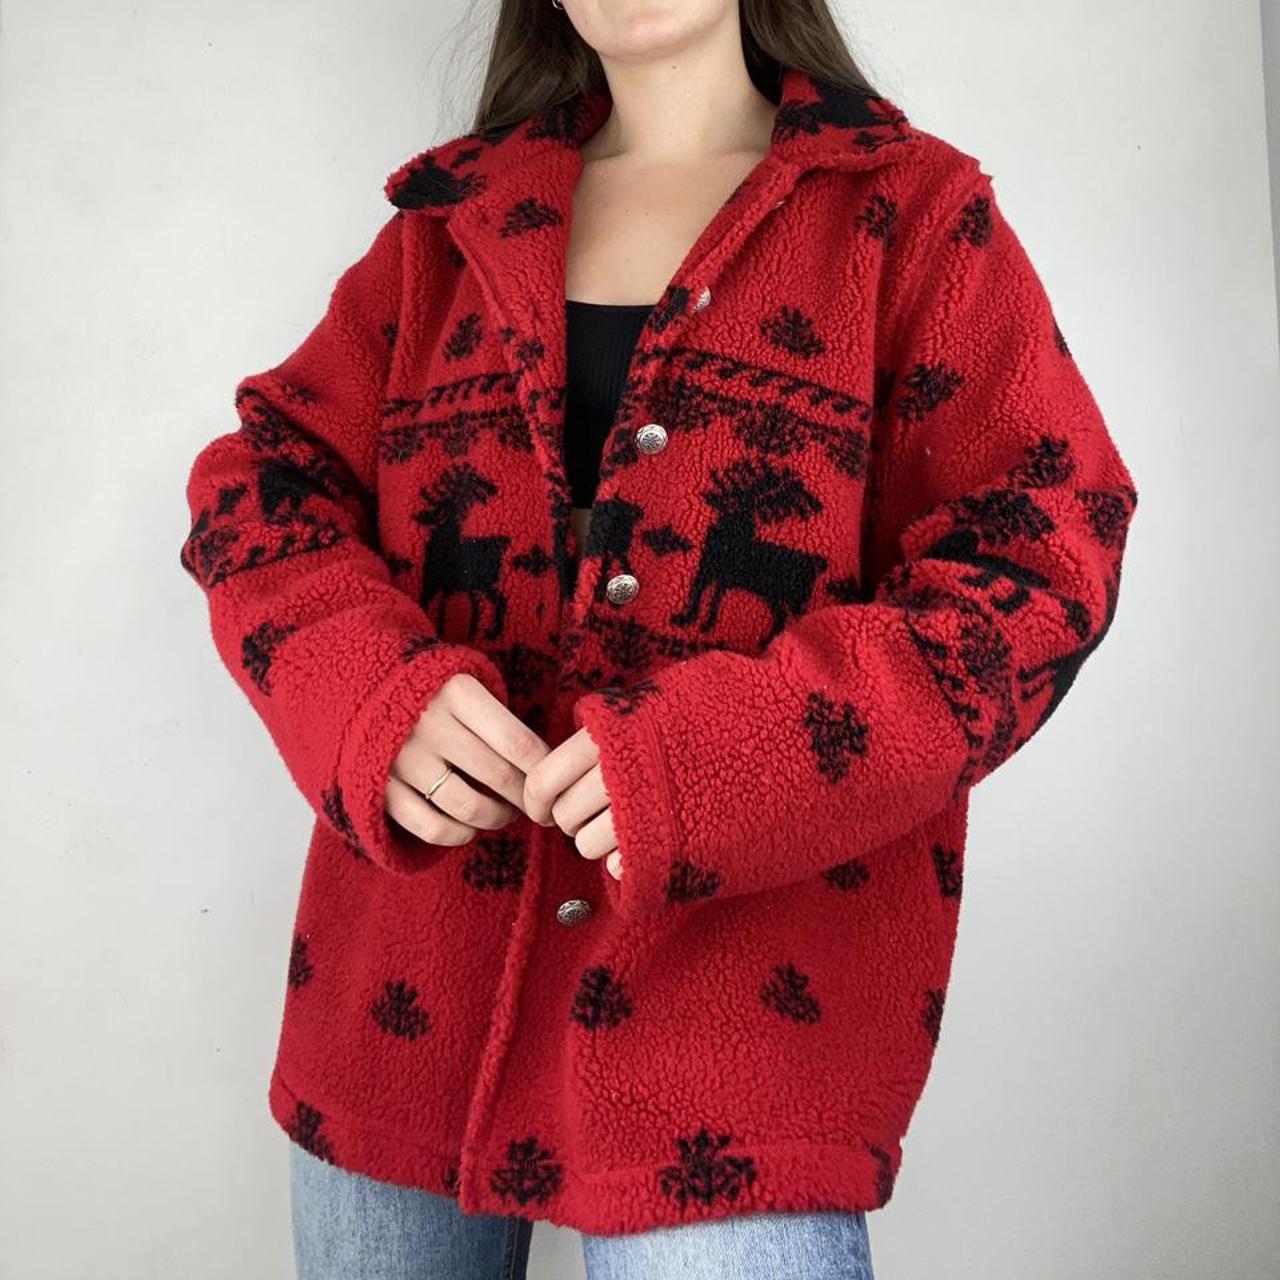 Women's Red and Black Jacket (2)